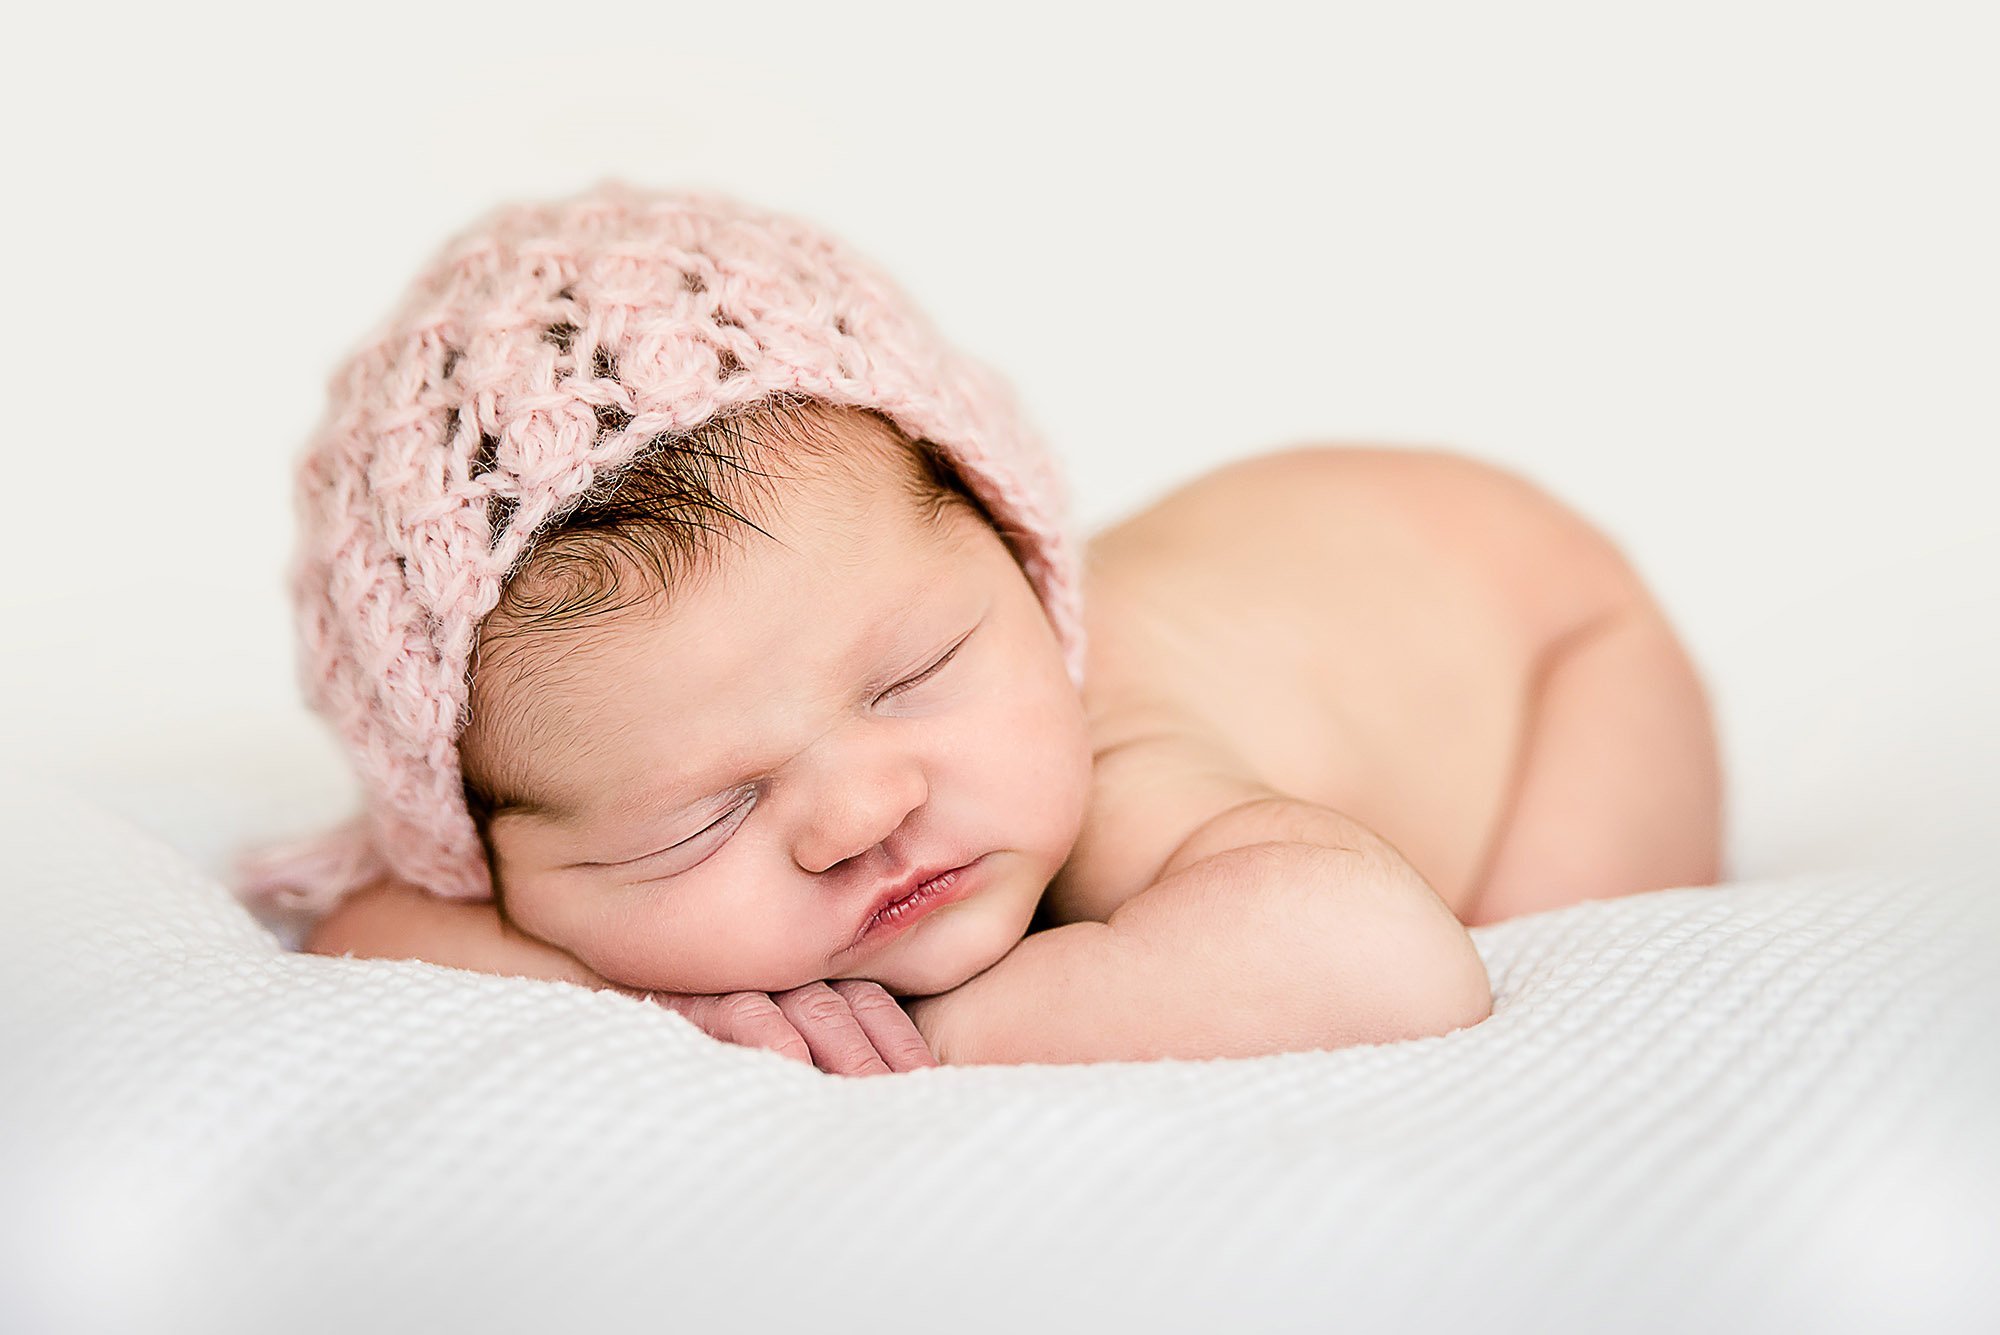 Newborn baby girl sleeping with head on hands with a pink knit cap on